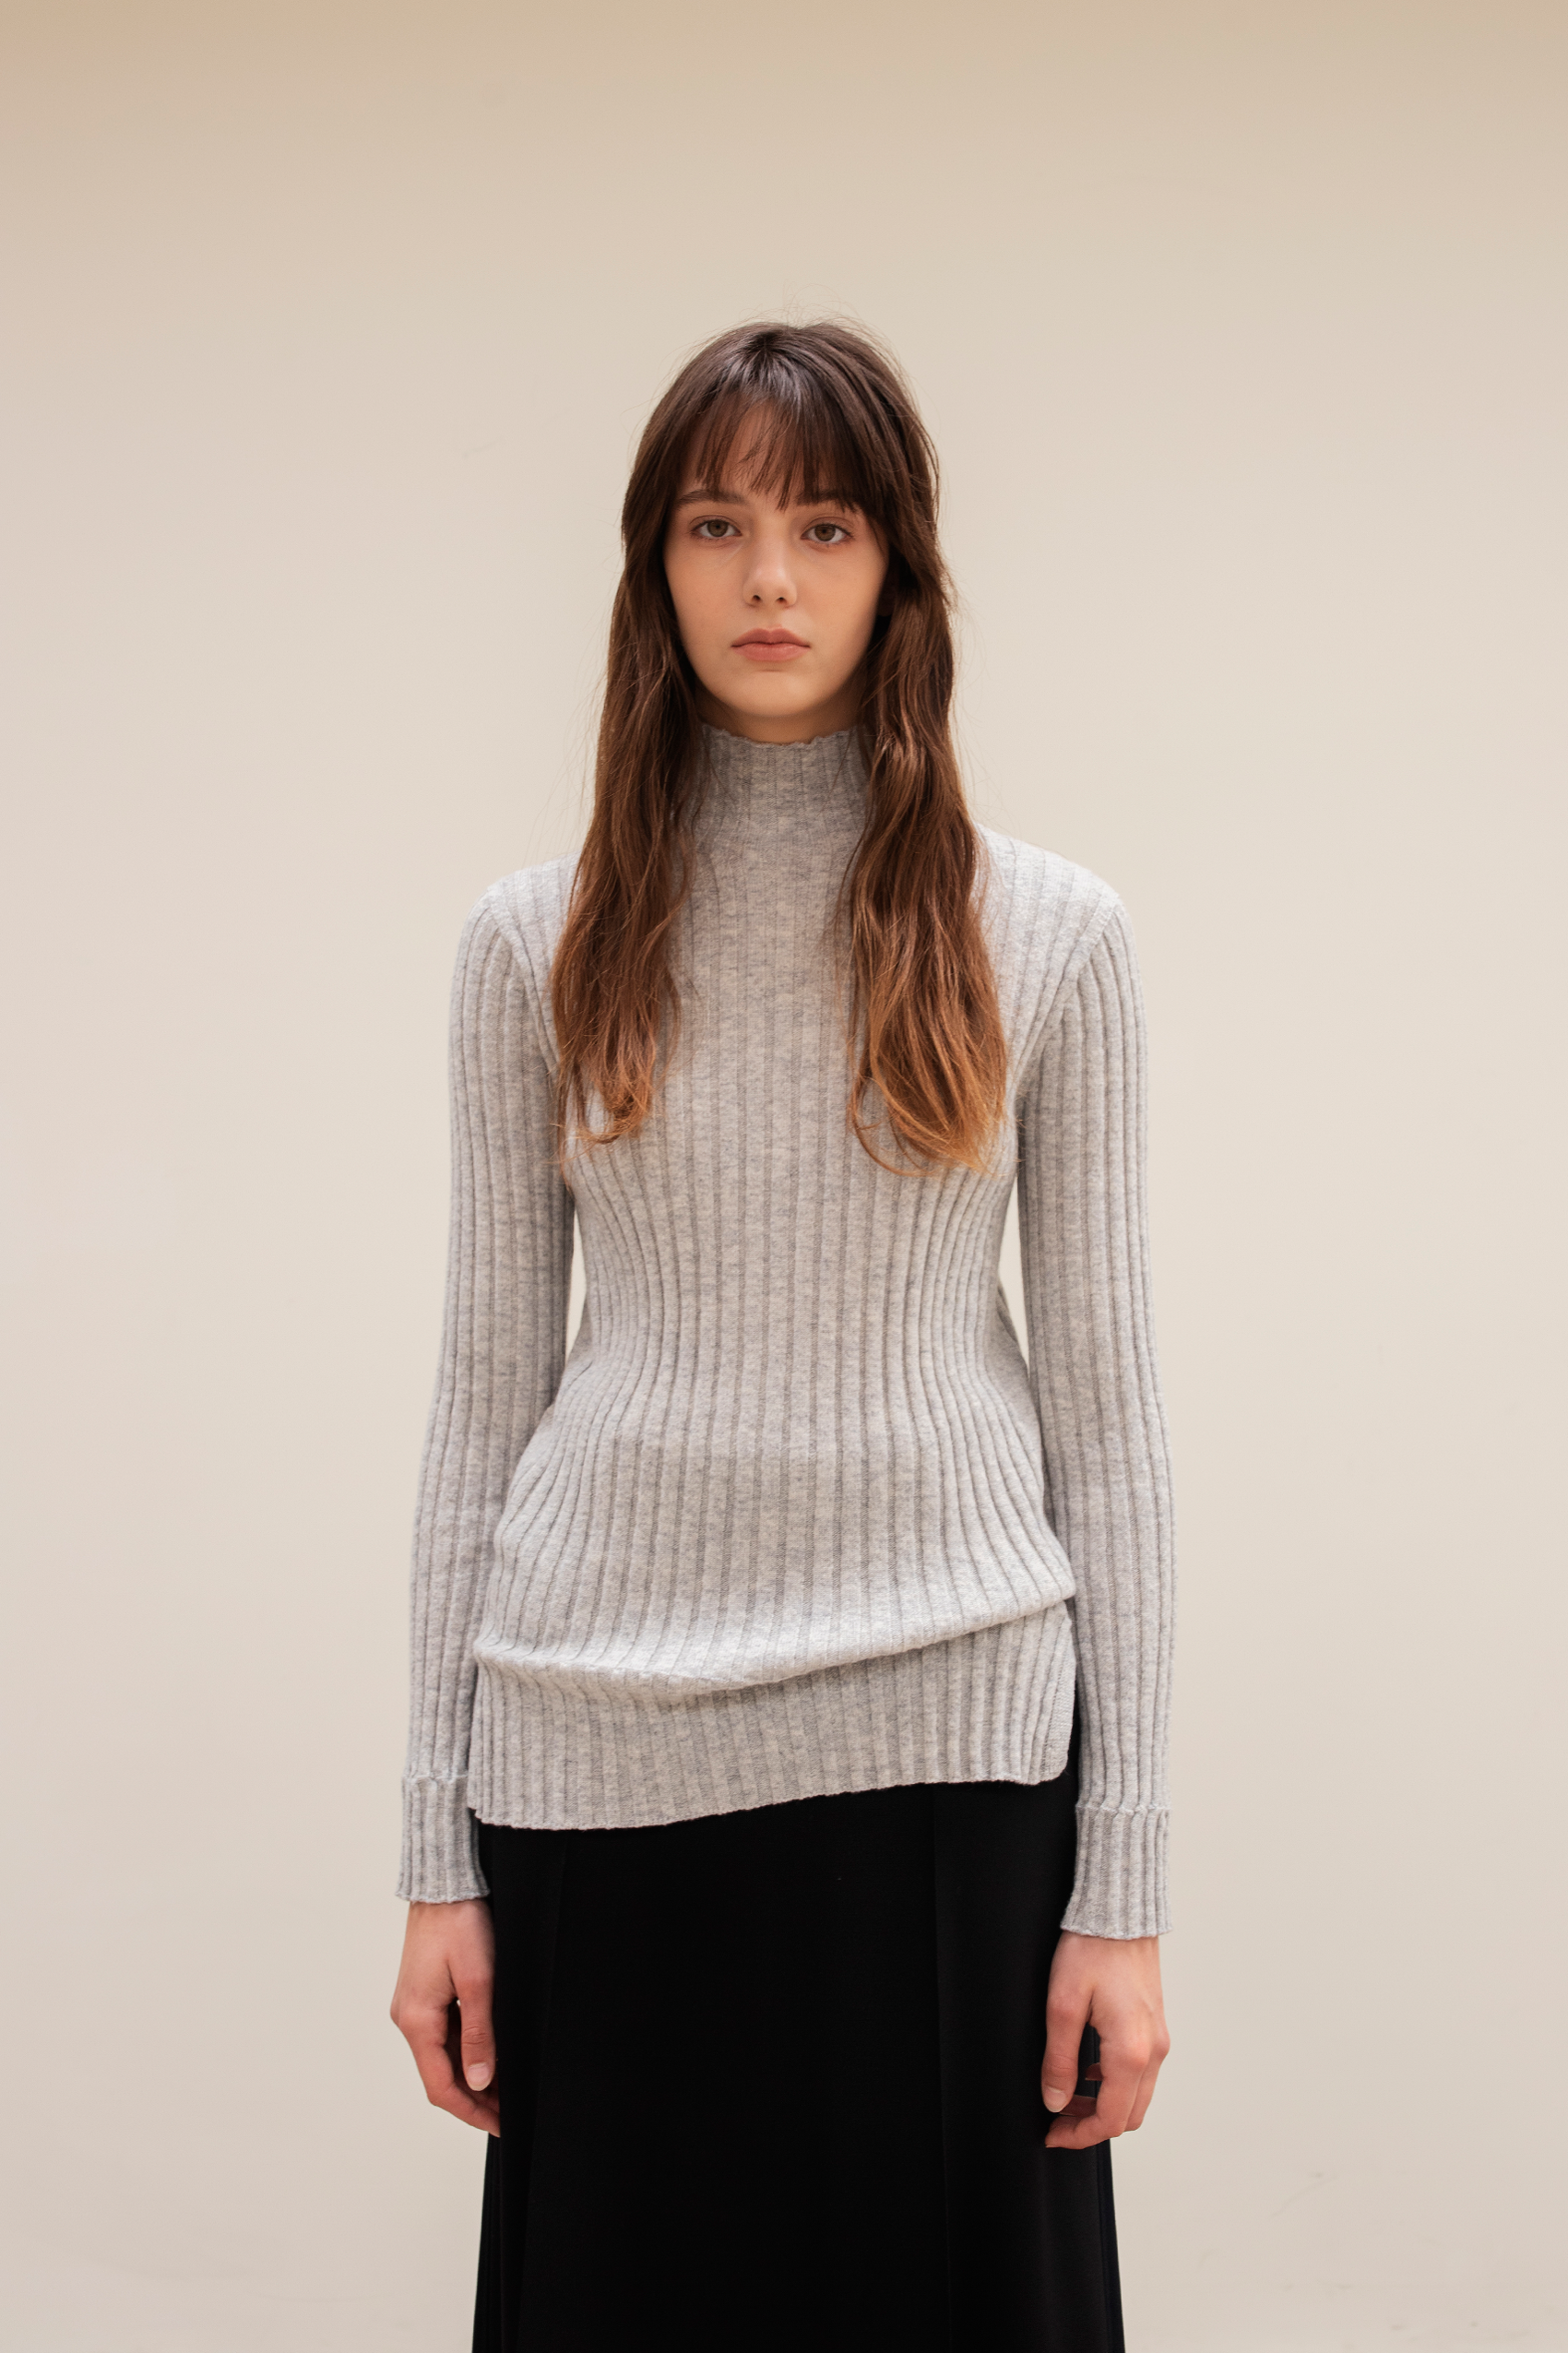 [New color] 프리미엄 캐시미어 100 골지 스웨터 Pure cashmere100 ribbed soft-touch sweater by whole-garment knitting - Gris grey